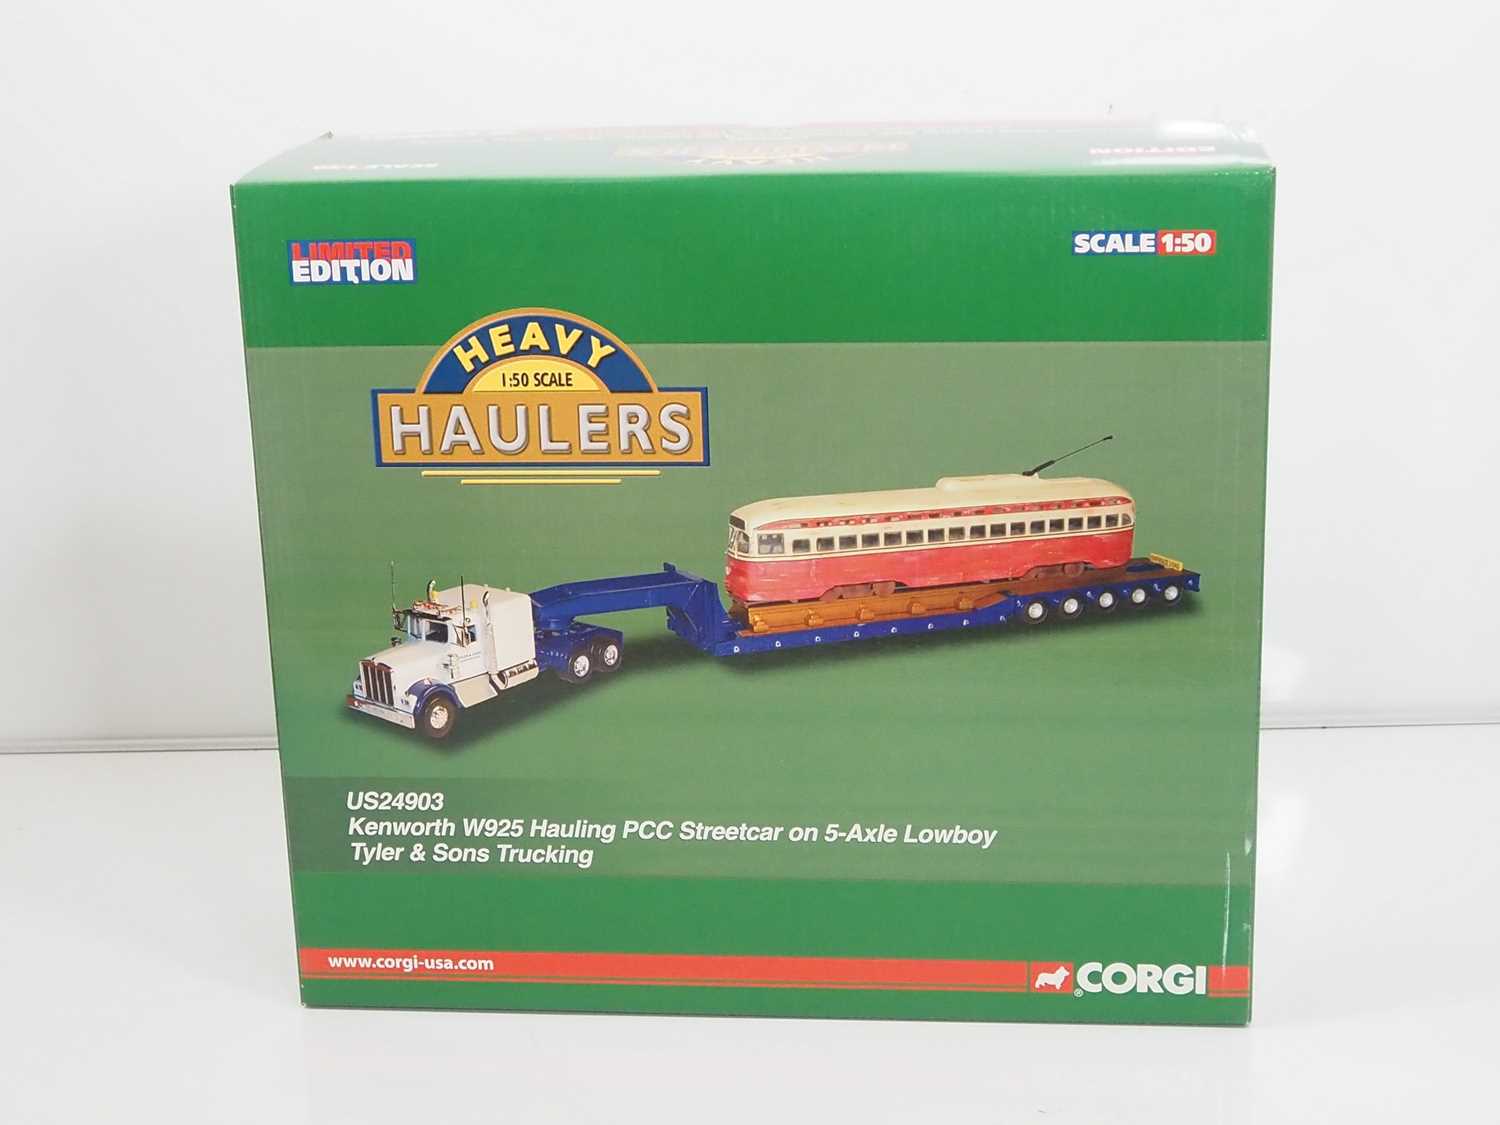 A CORGI 1:50 scale American Outline Heavy Haulers' Set US24903 in Tyler and Sons' livery hauling - Image 4 of 5